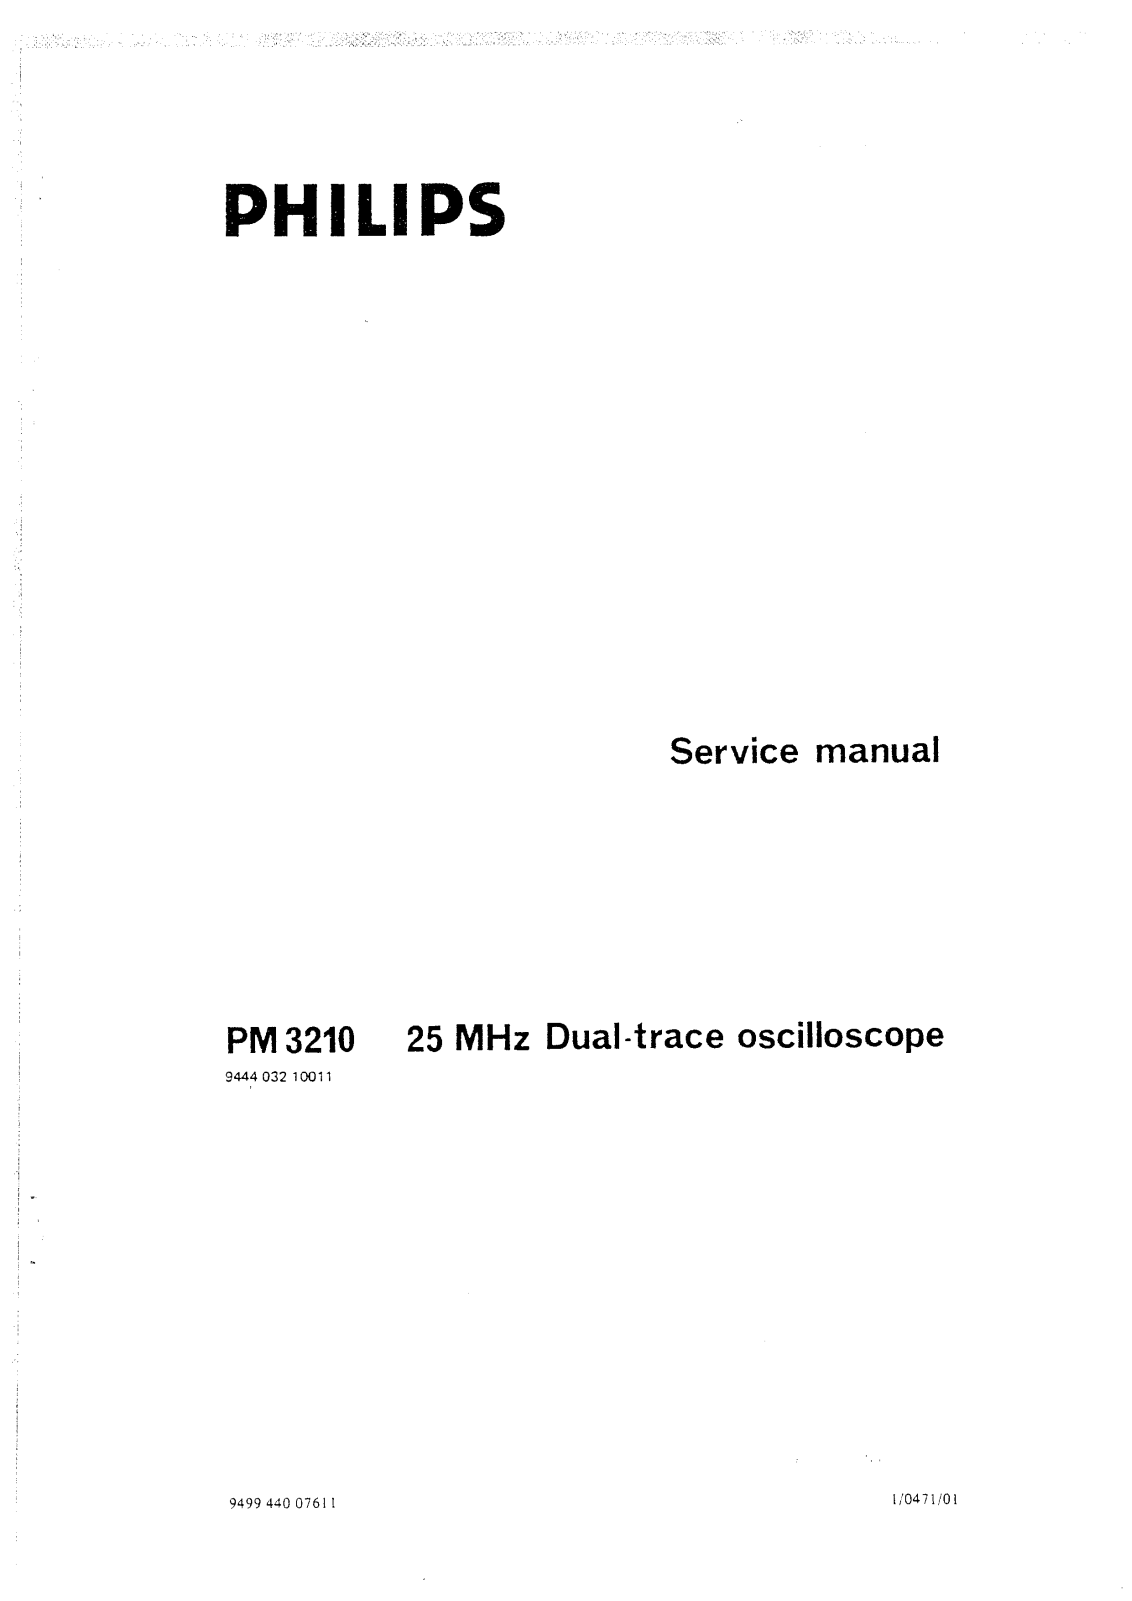 Philips PM-3210 Service Manual